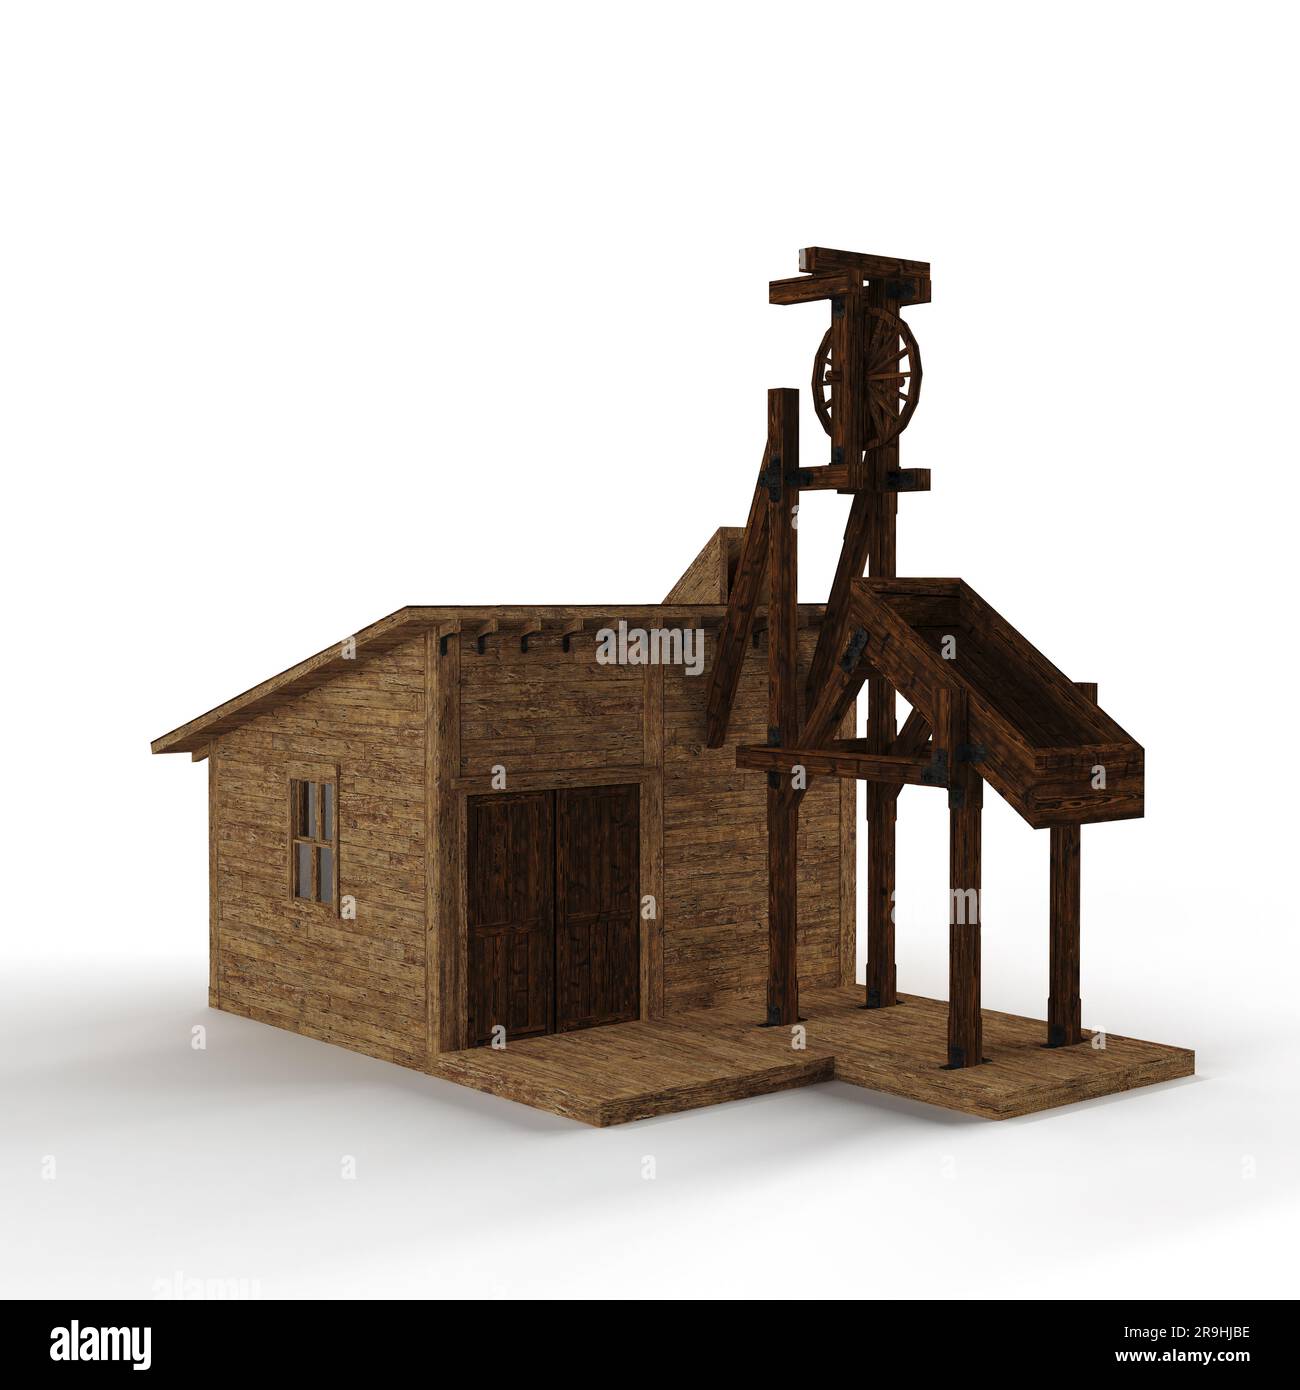 A 3D rendered scale model of a wild west style mining models Stock Photo